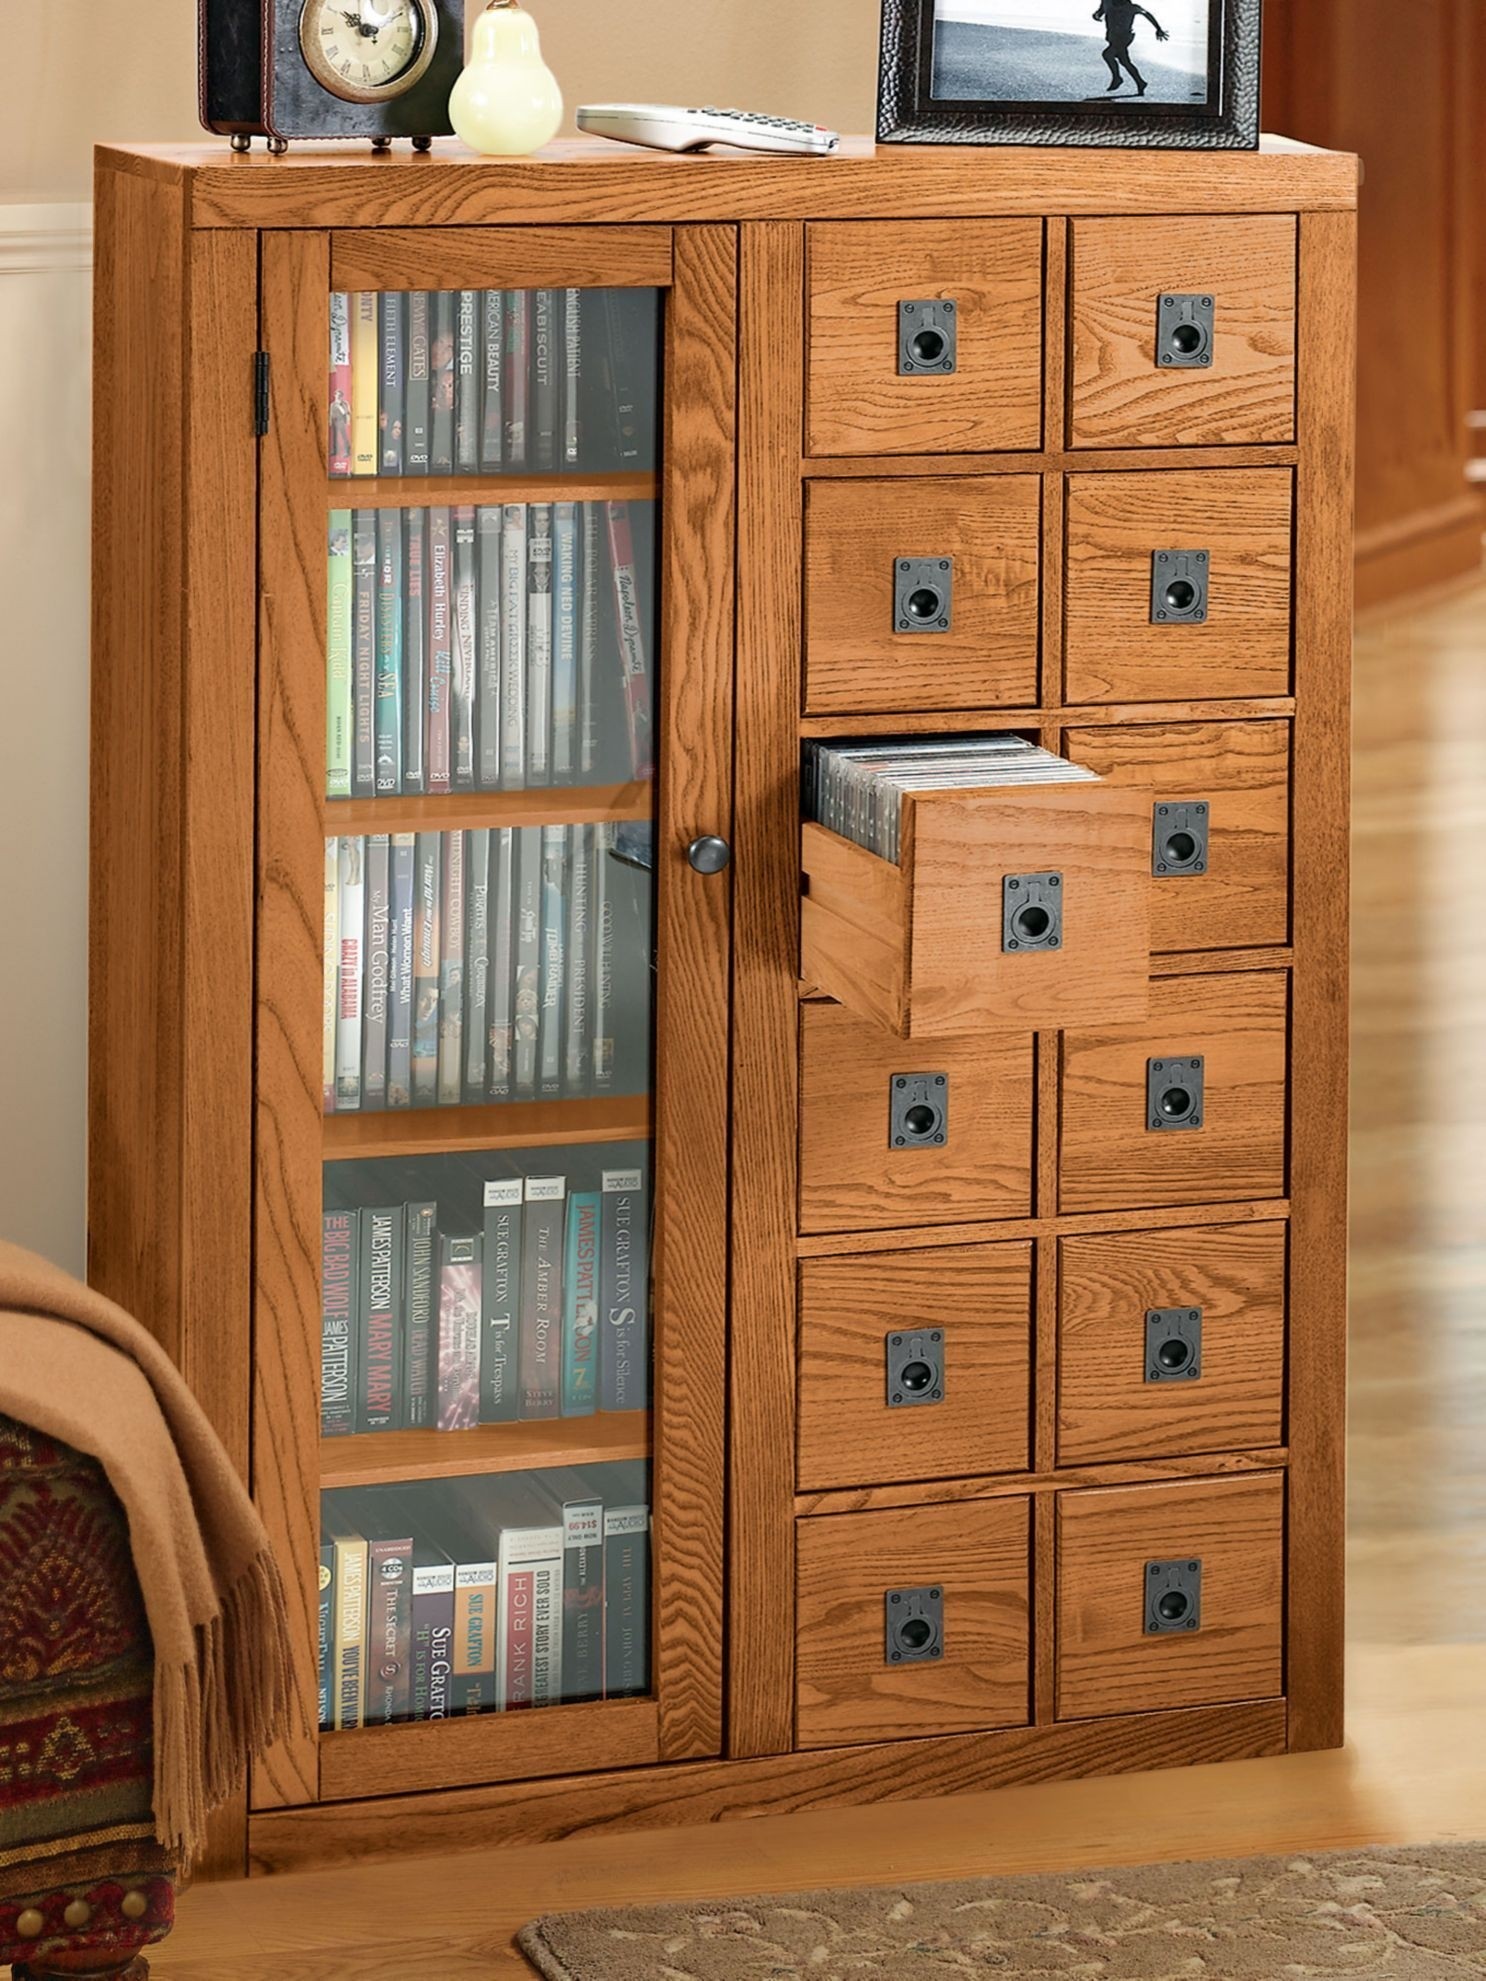 Cd storage cabinets with drawers